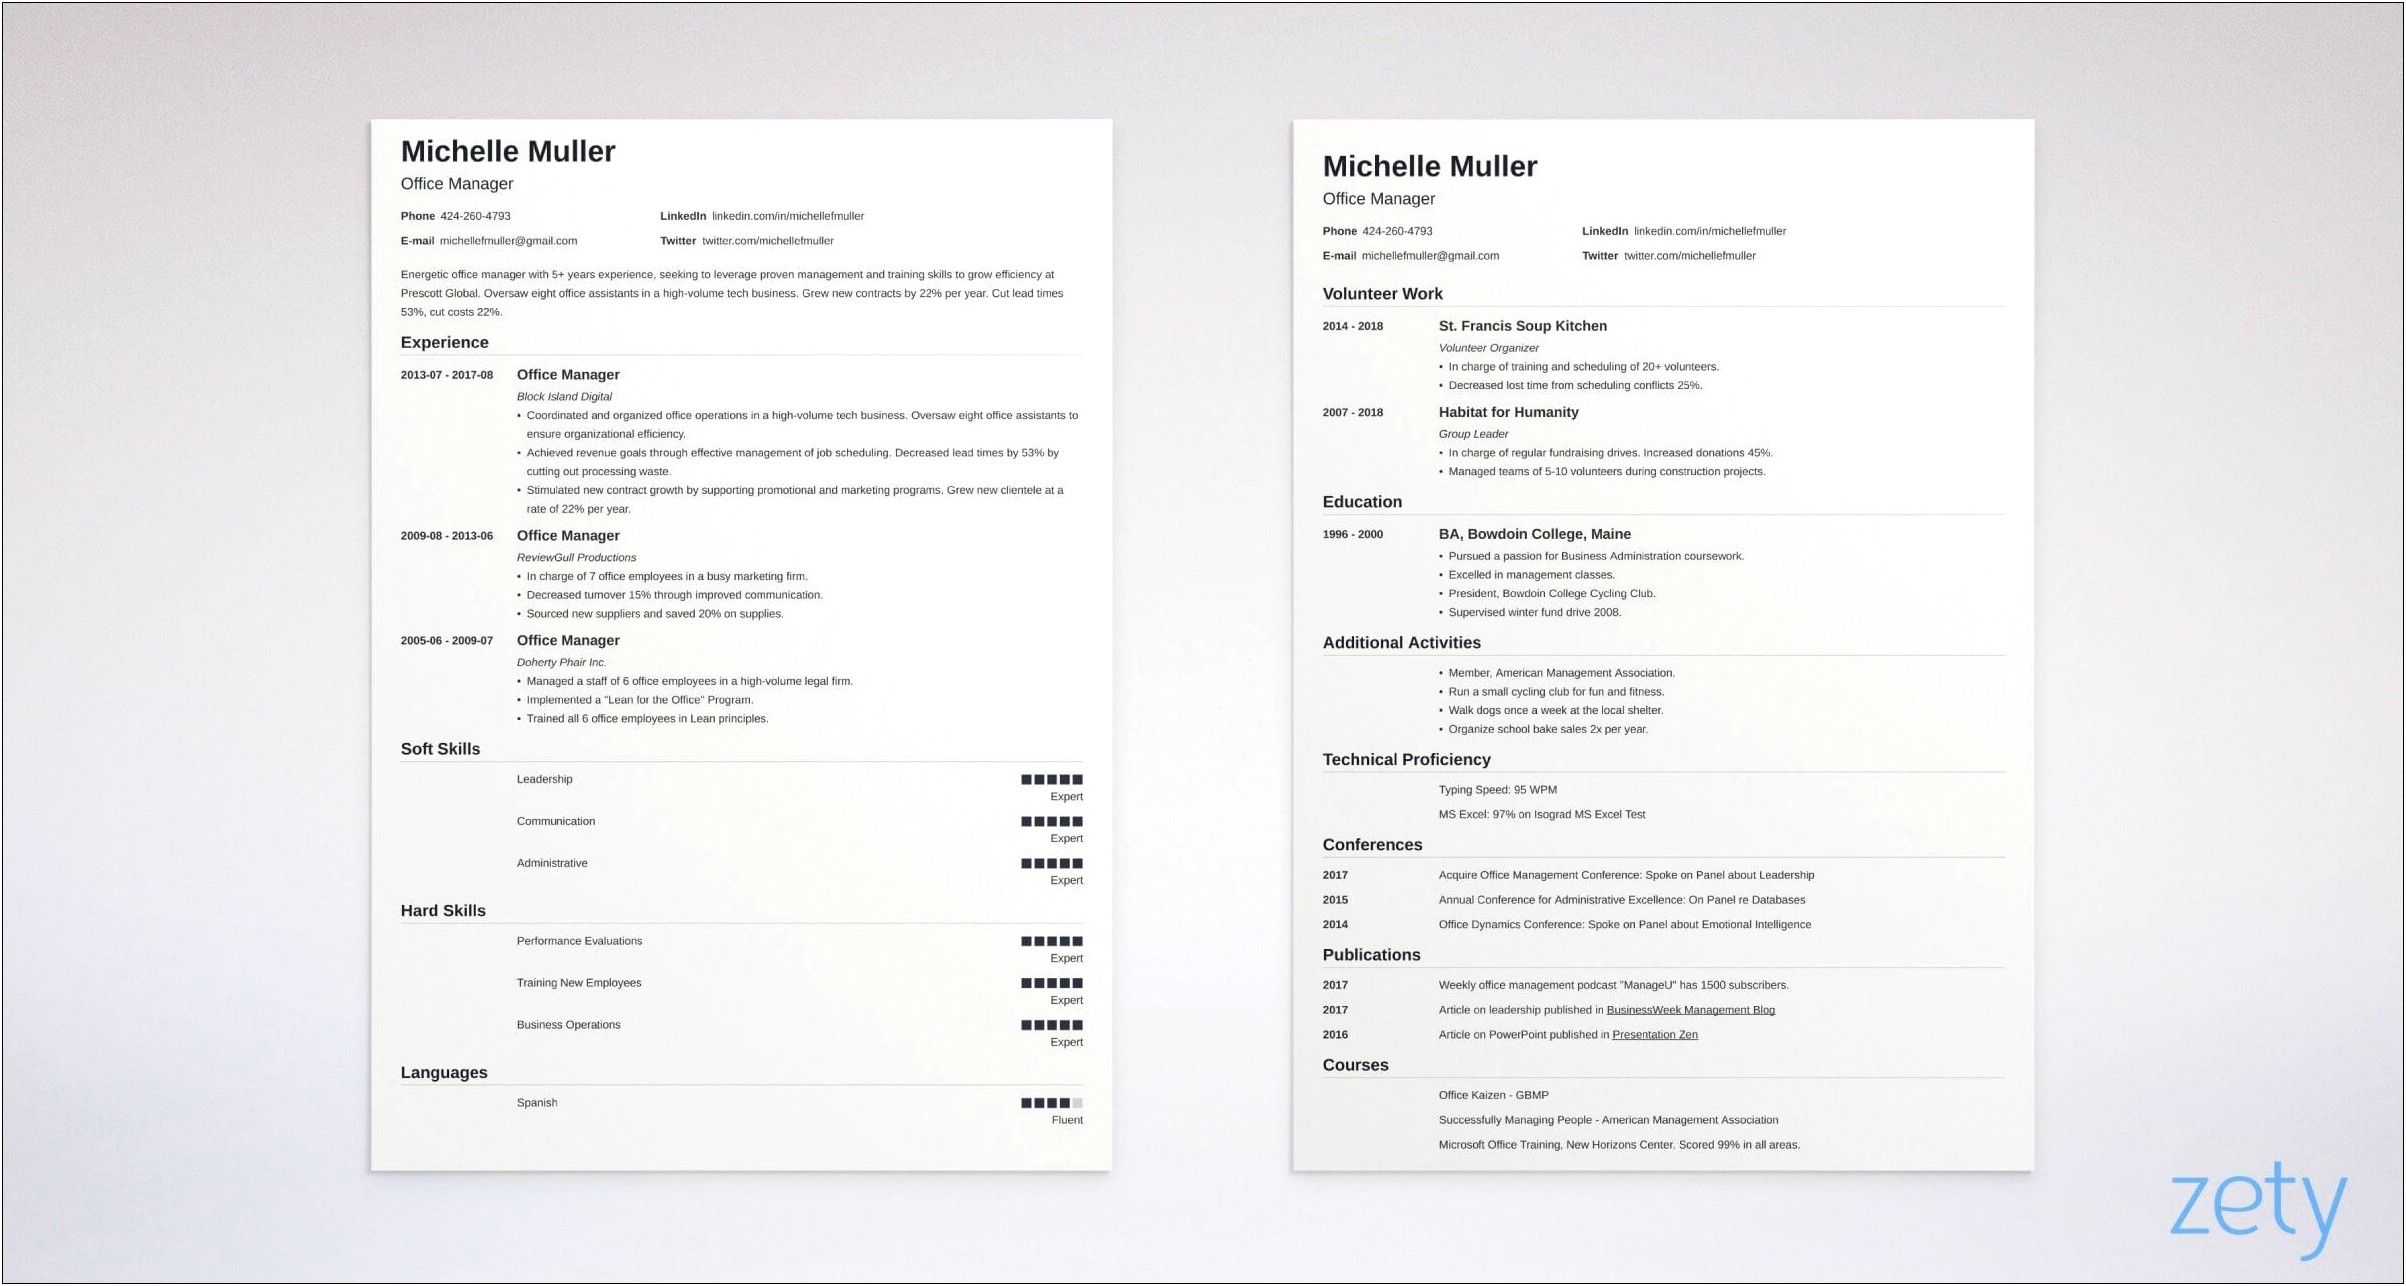 Resumes Formats To Draw On Multiple Jobs